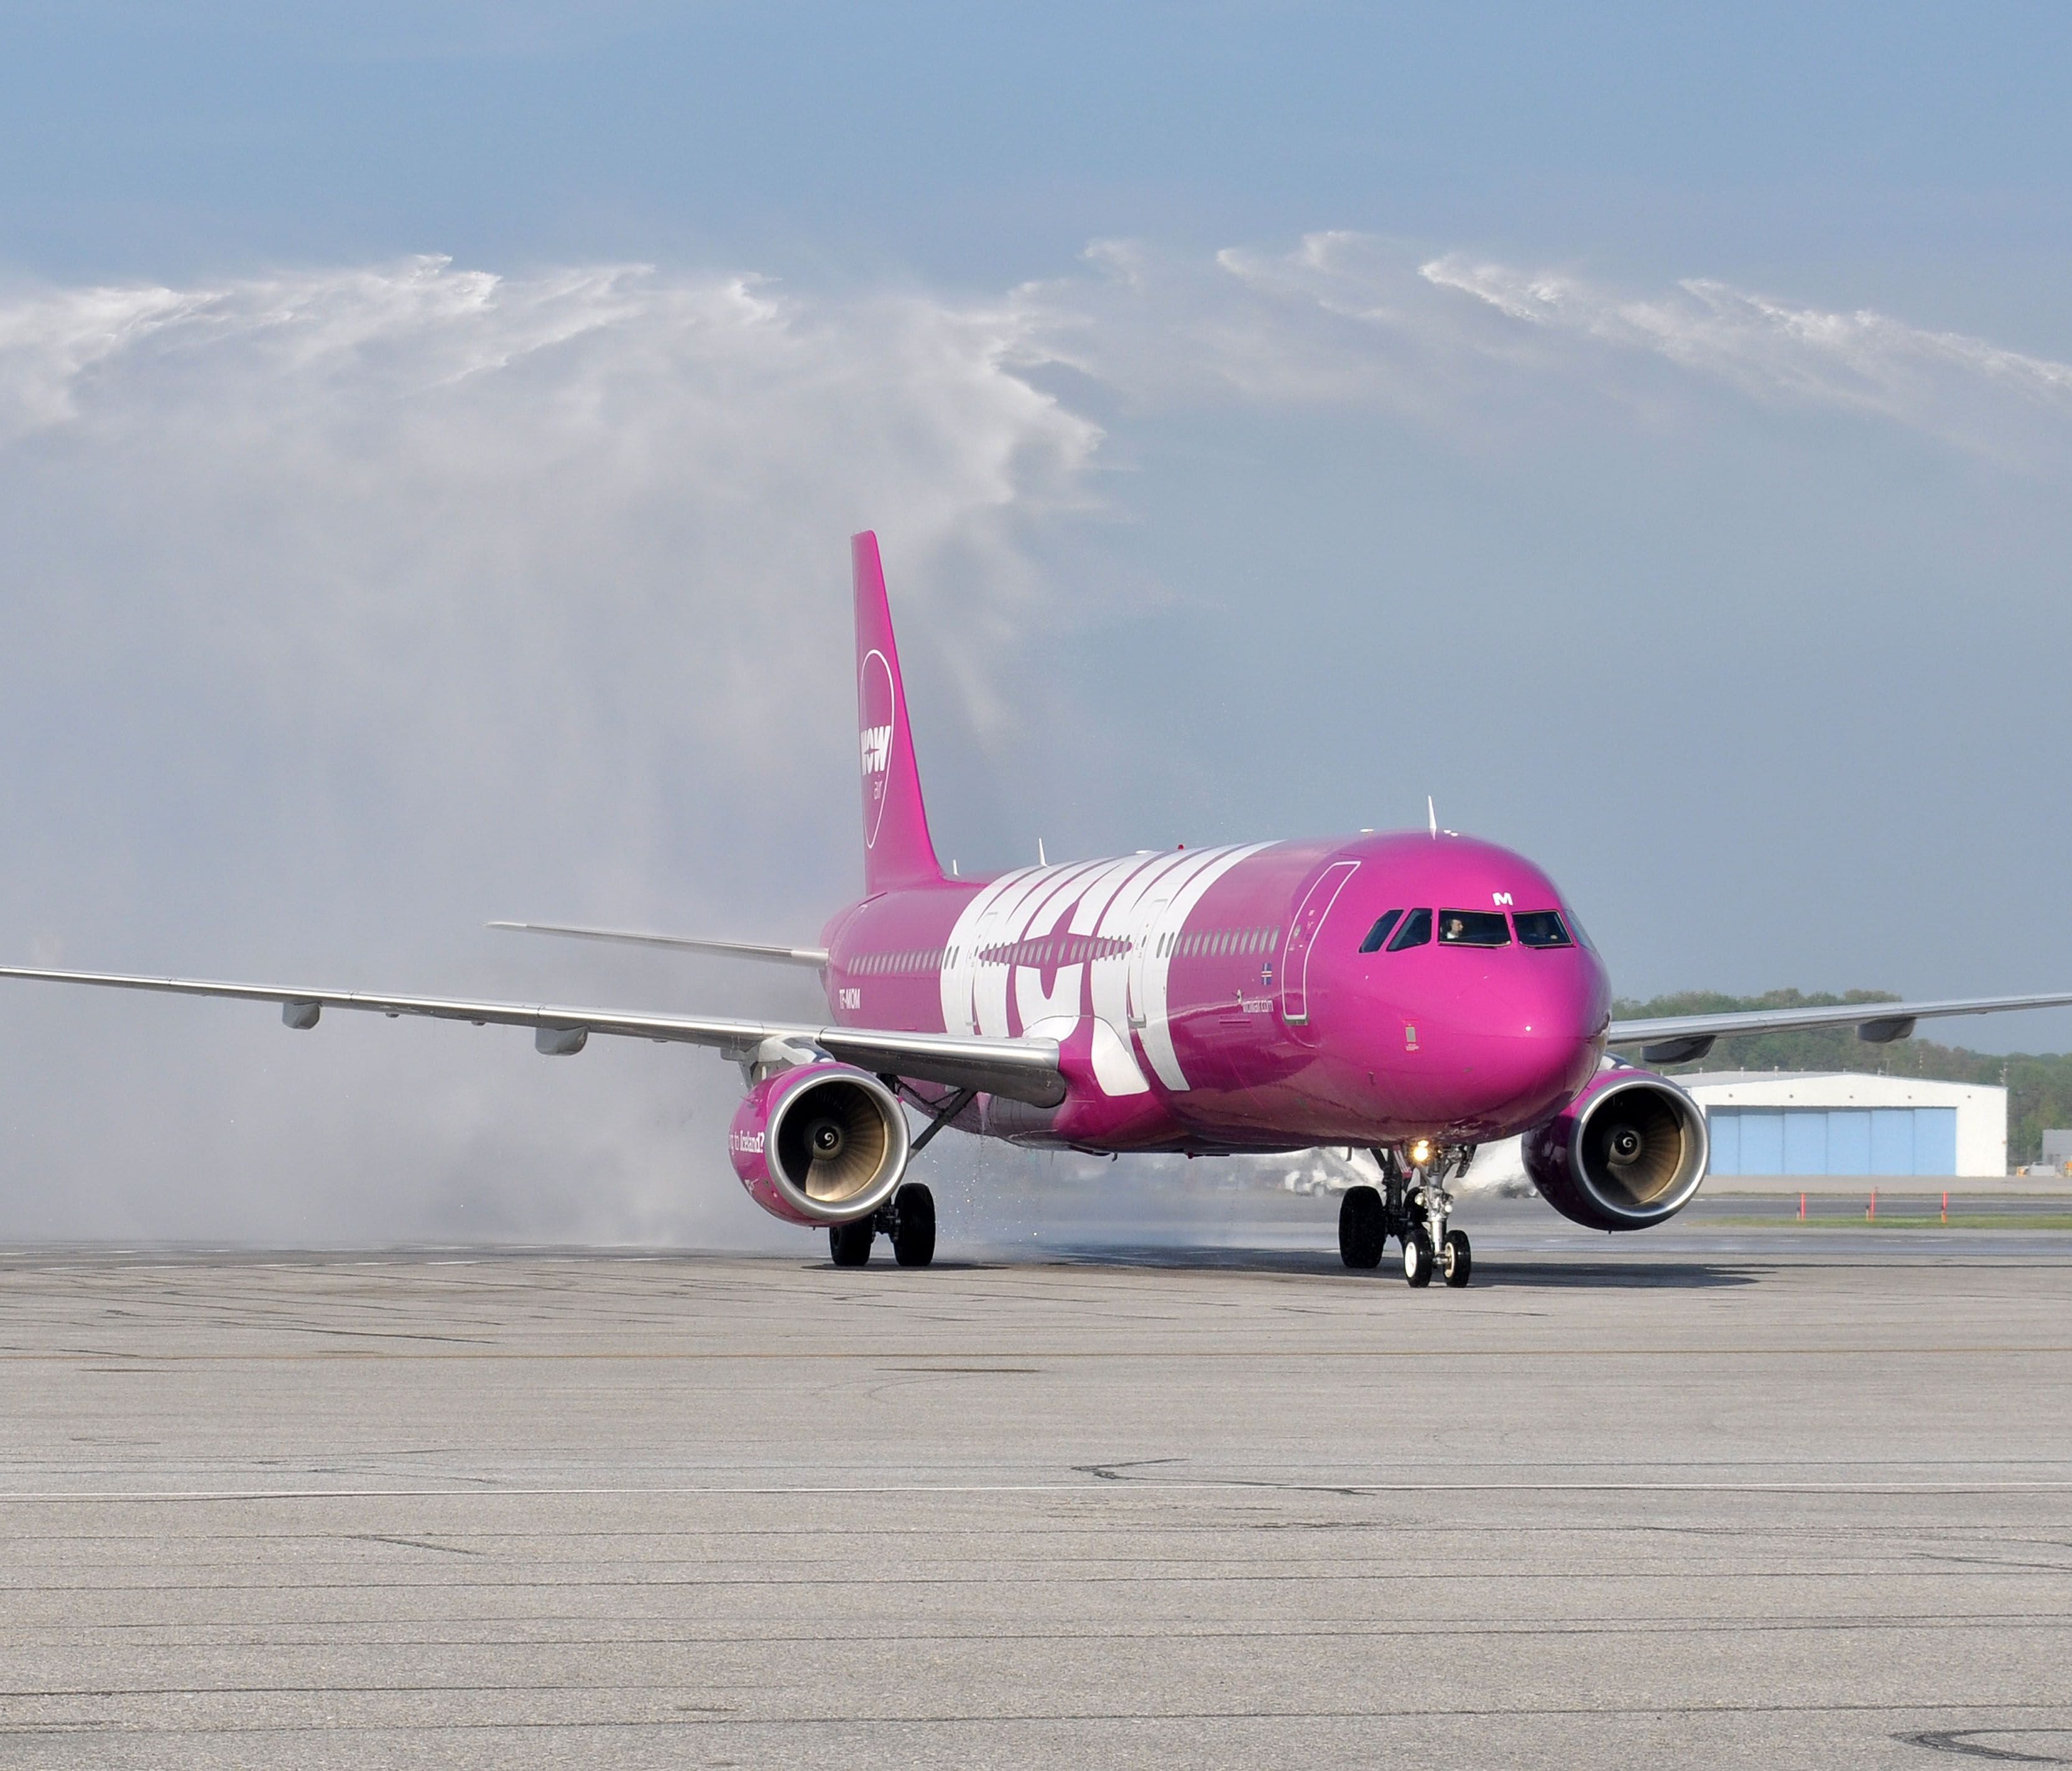 WOW Air's inaugural flight to Baltimore/Washington International Airport gets a water-cannon salute on May 8, 2015.